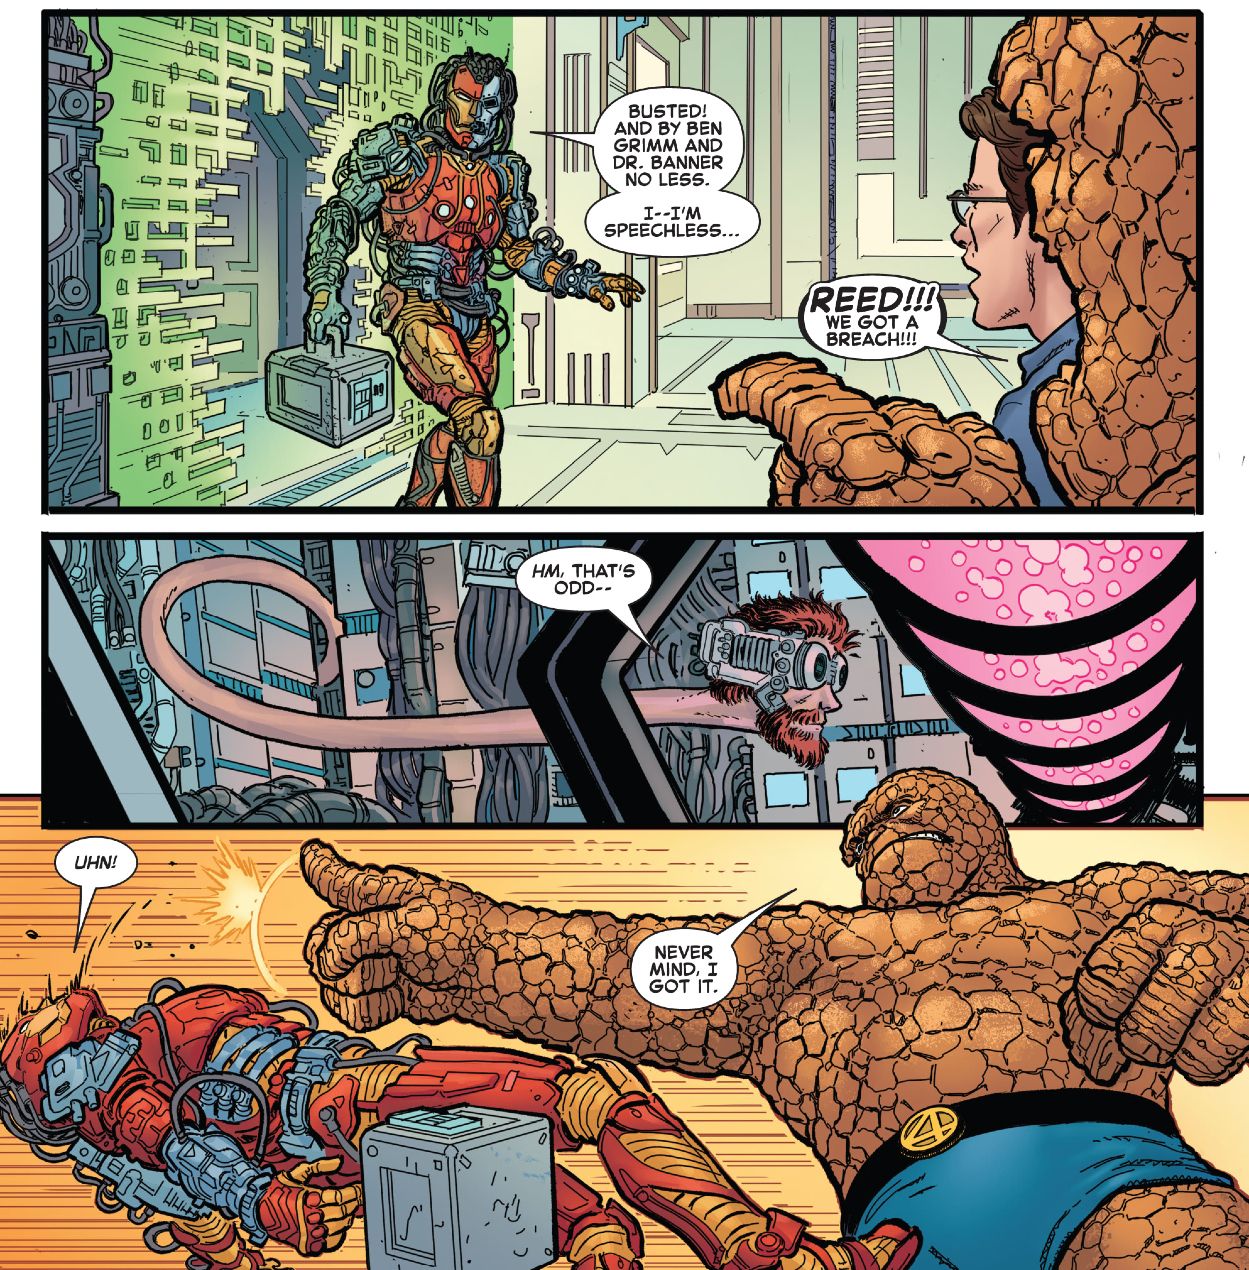 Thing fights a mysterious intruder in Clobberin' Time #1 